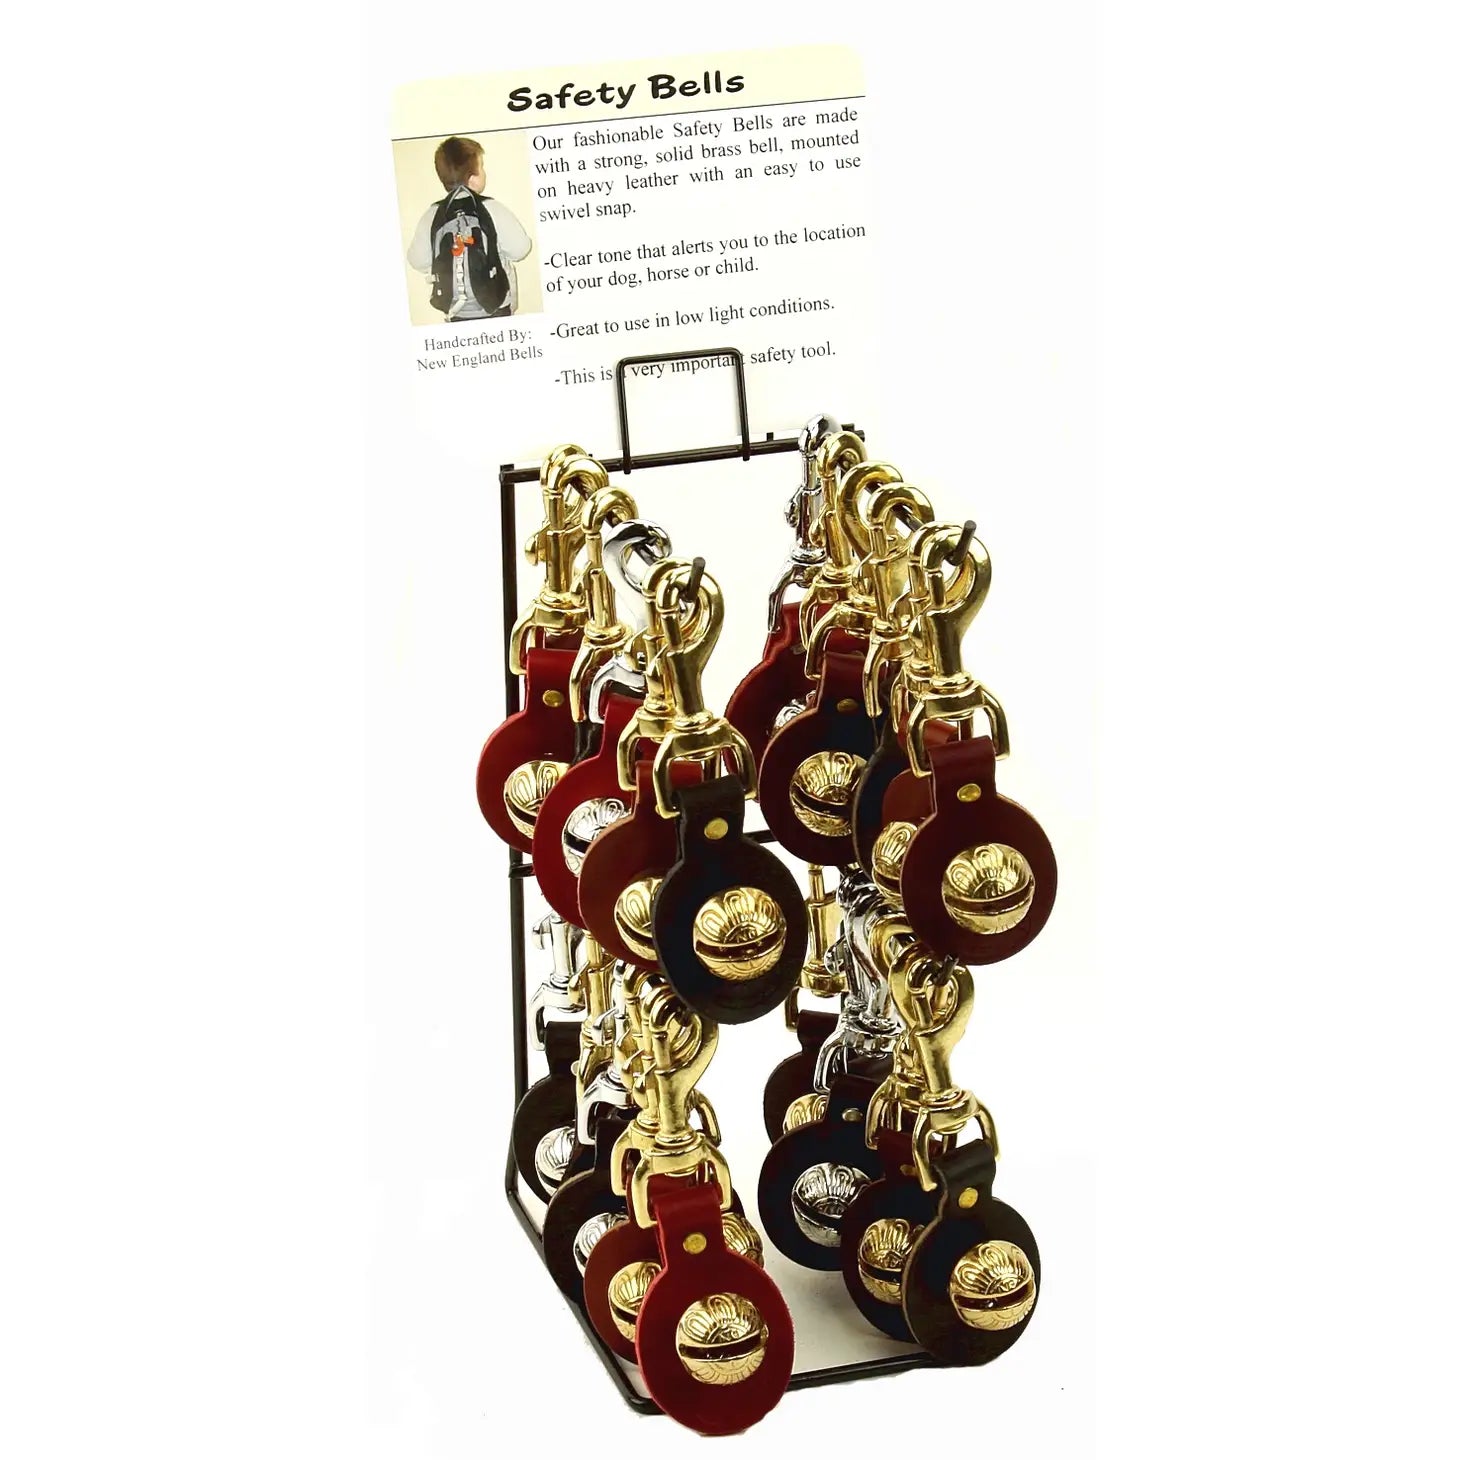 Safety Bells by New England Bells